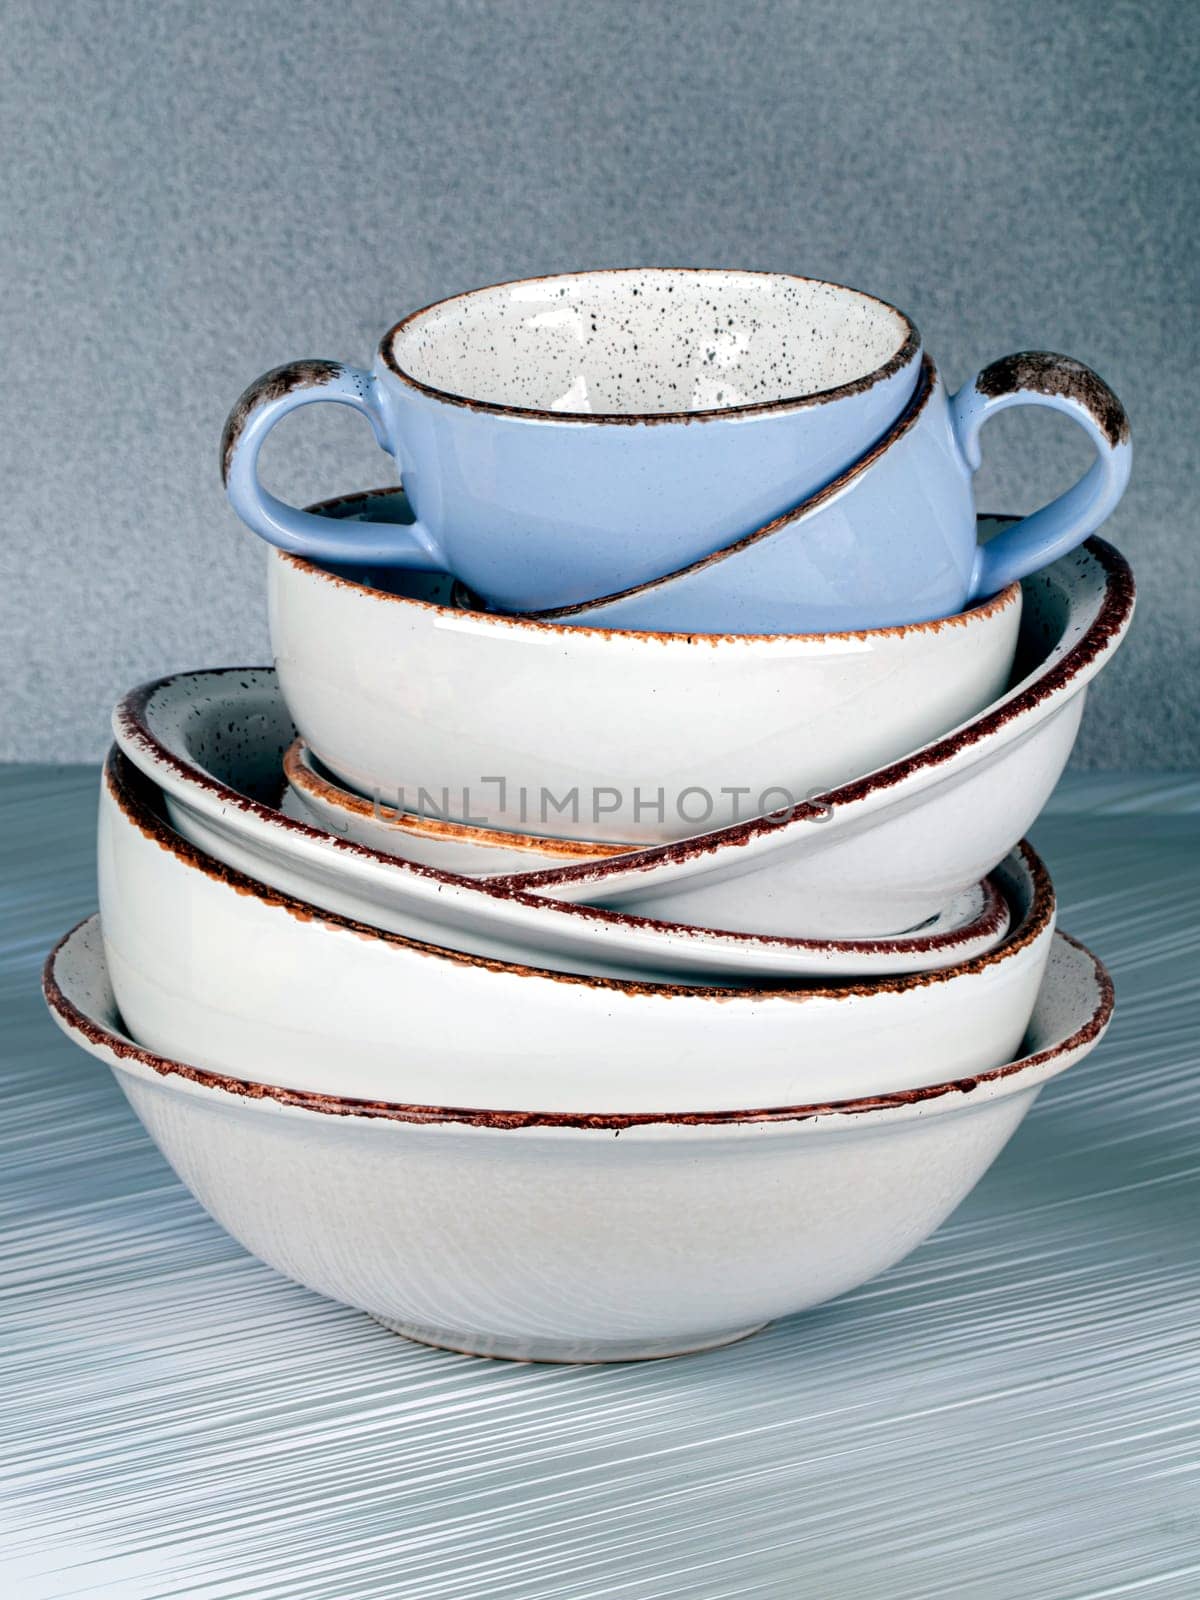 Ceramic bowls and cups are stacked on top of each other.